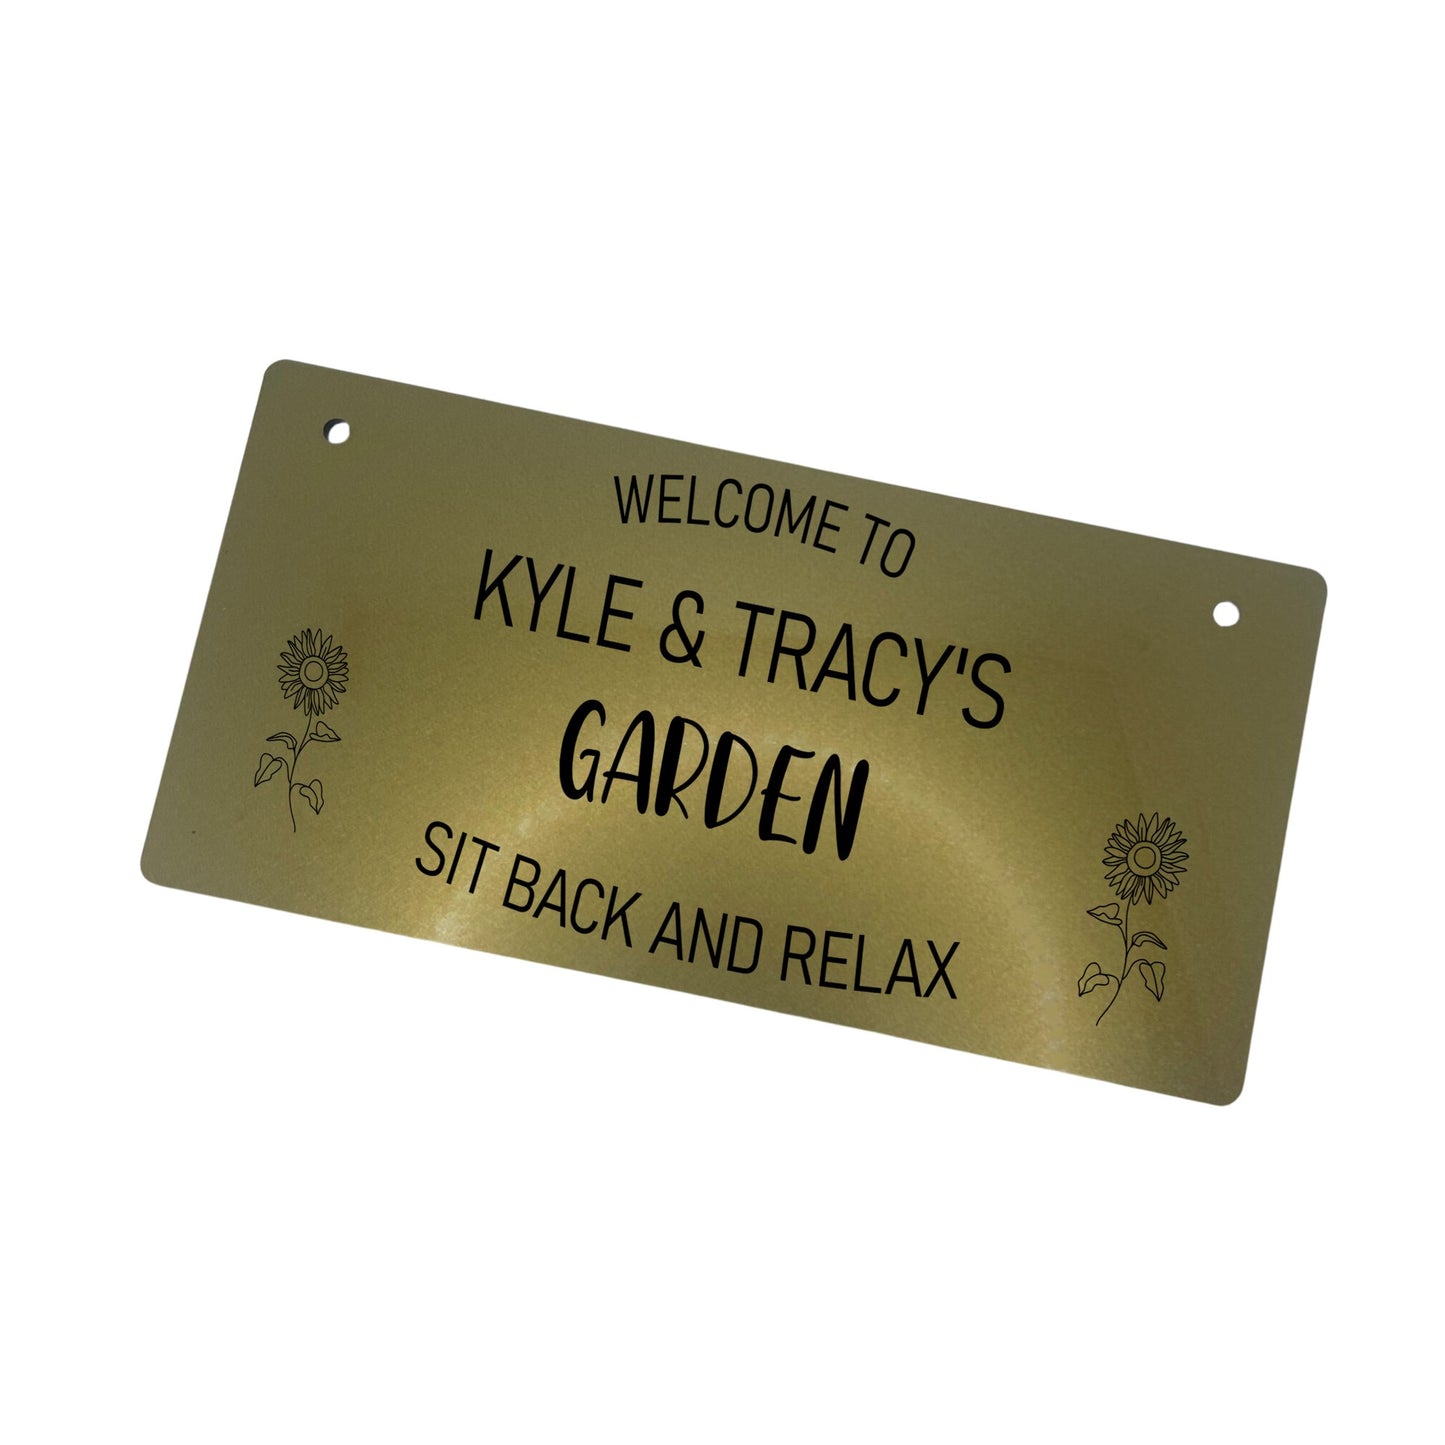 Alt text: Personalised Garden Sign - Gold Acrylic Description: A charming personalized garden sign crafted from 3mm thick acrylic in a beautiful gold finish. The sign features engraved text "Welcome to [Your Name's] Garden" at the top, "Garden" in the middle, and "Sit Back and Relax" at the bottom. Enhanced with two laser-engraved sunflowers. Comes with two 5mm holes and black twine for easy hanging.